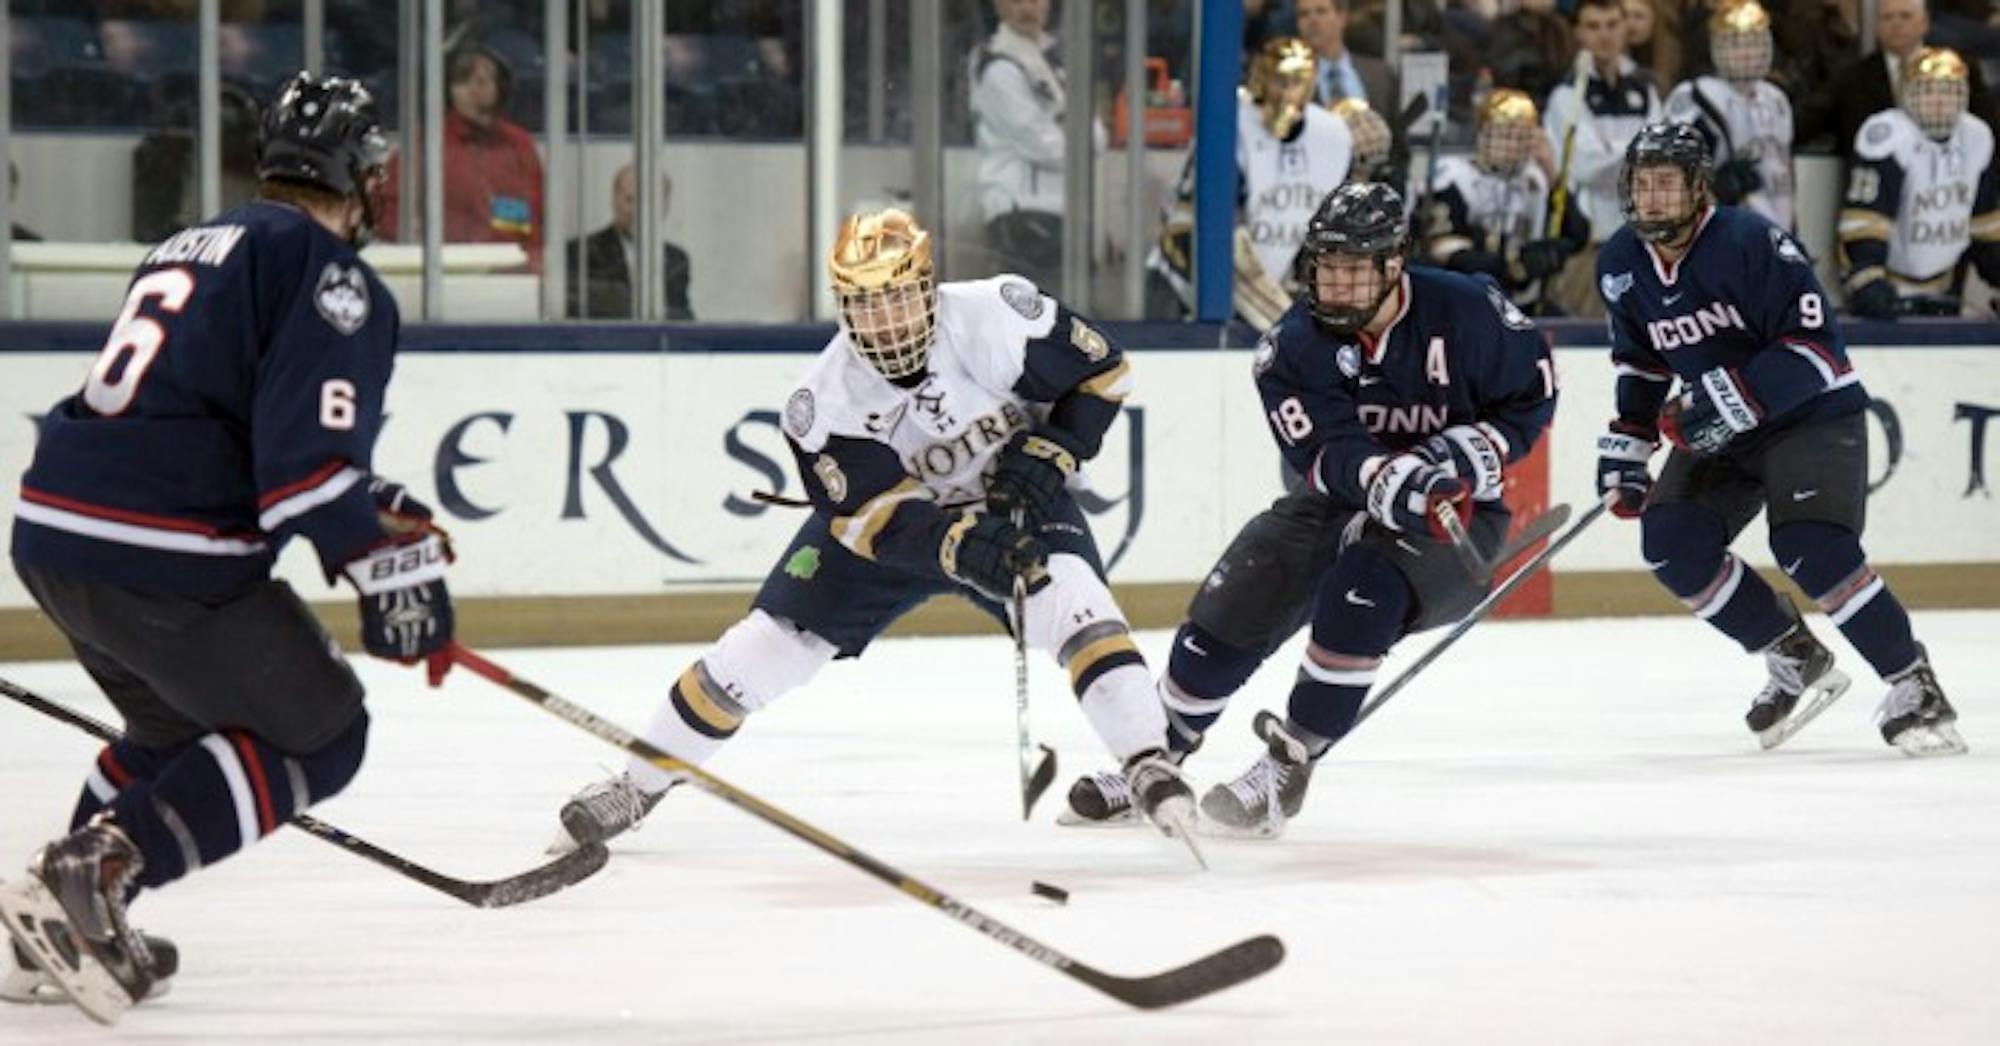 Irish senior defenseman Robbie Russo weaves through the UConn offensive zone during the two teams’ 3-3 tie Jan. 16 at Compton Family Ice Arena. Russo leads all Irish defensemen with 25 points this season.